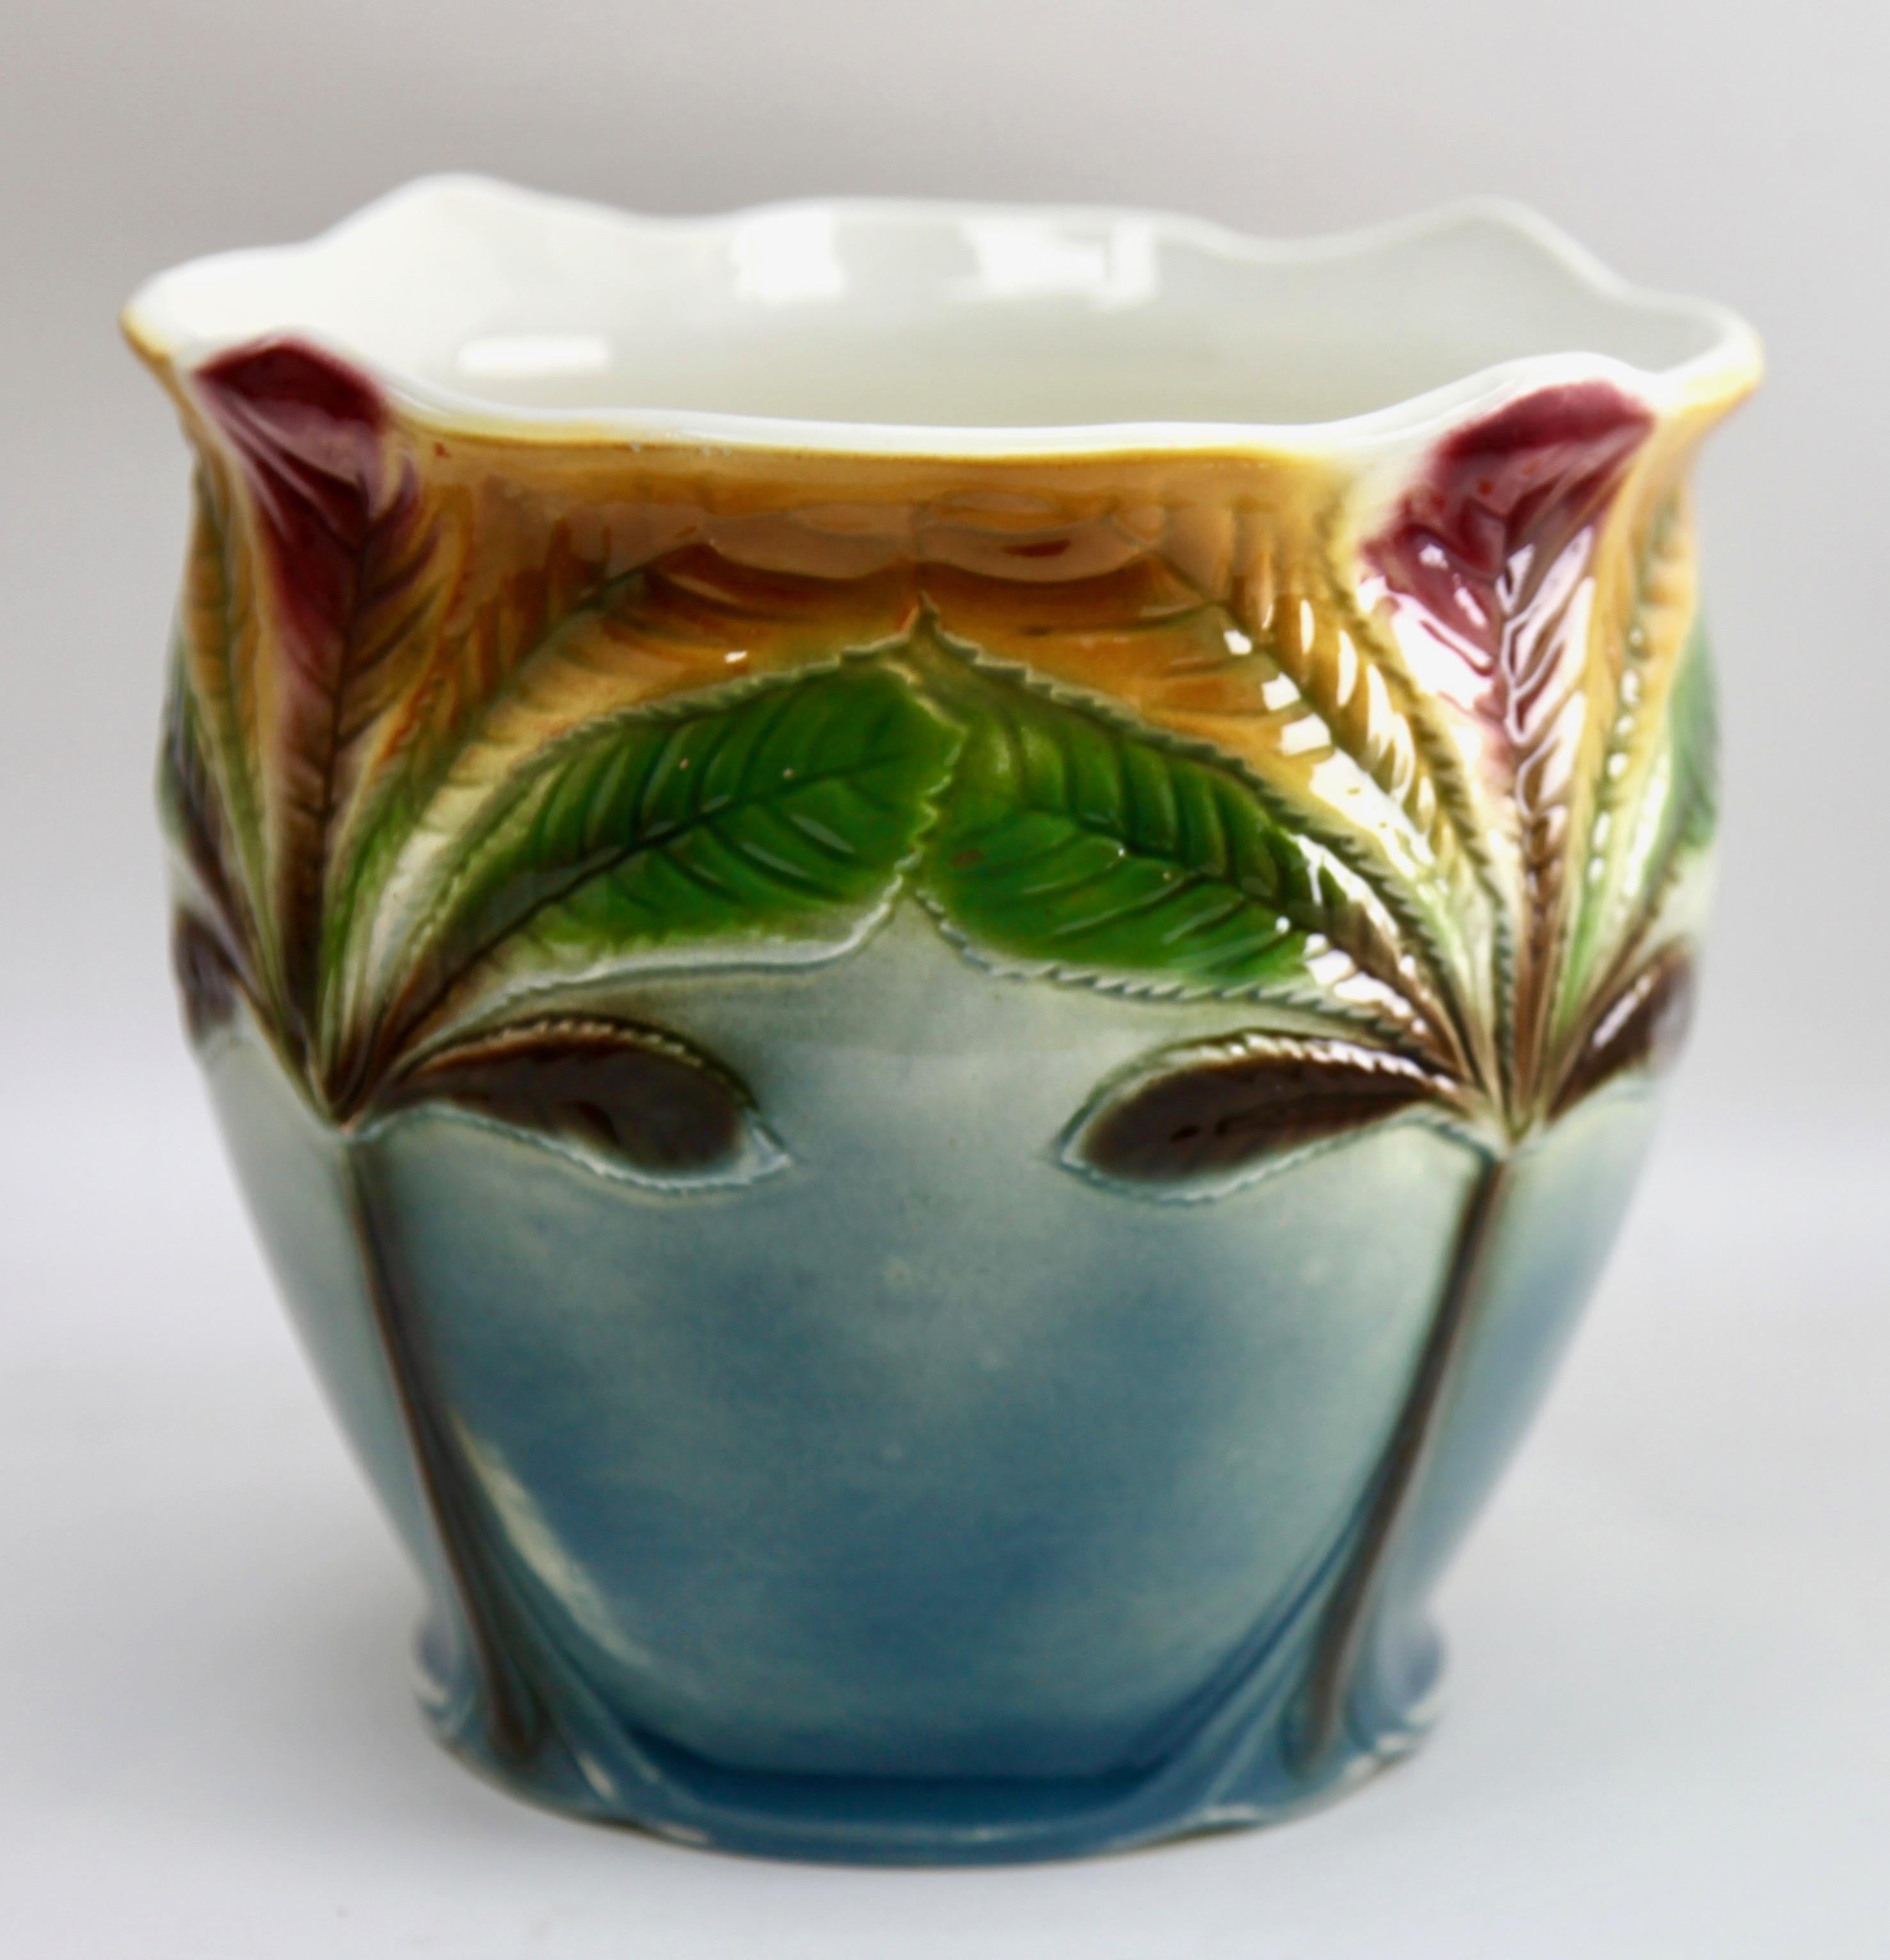 Brilliant handmade hand glazed Art Nouveau Planter jardinière, 1930
Wonderful Art Nouveau period/ ceramic planter jardinière, handmade and hand glazed in brilliant blue with red glazed details.

The piece is in excellent condition and a real